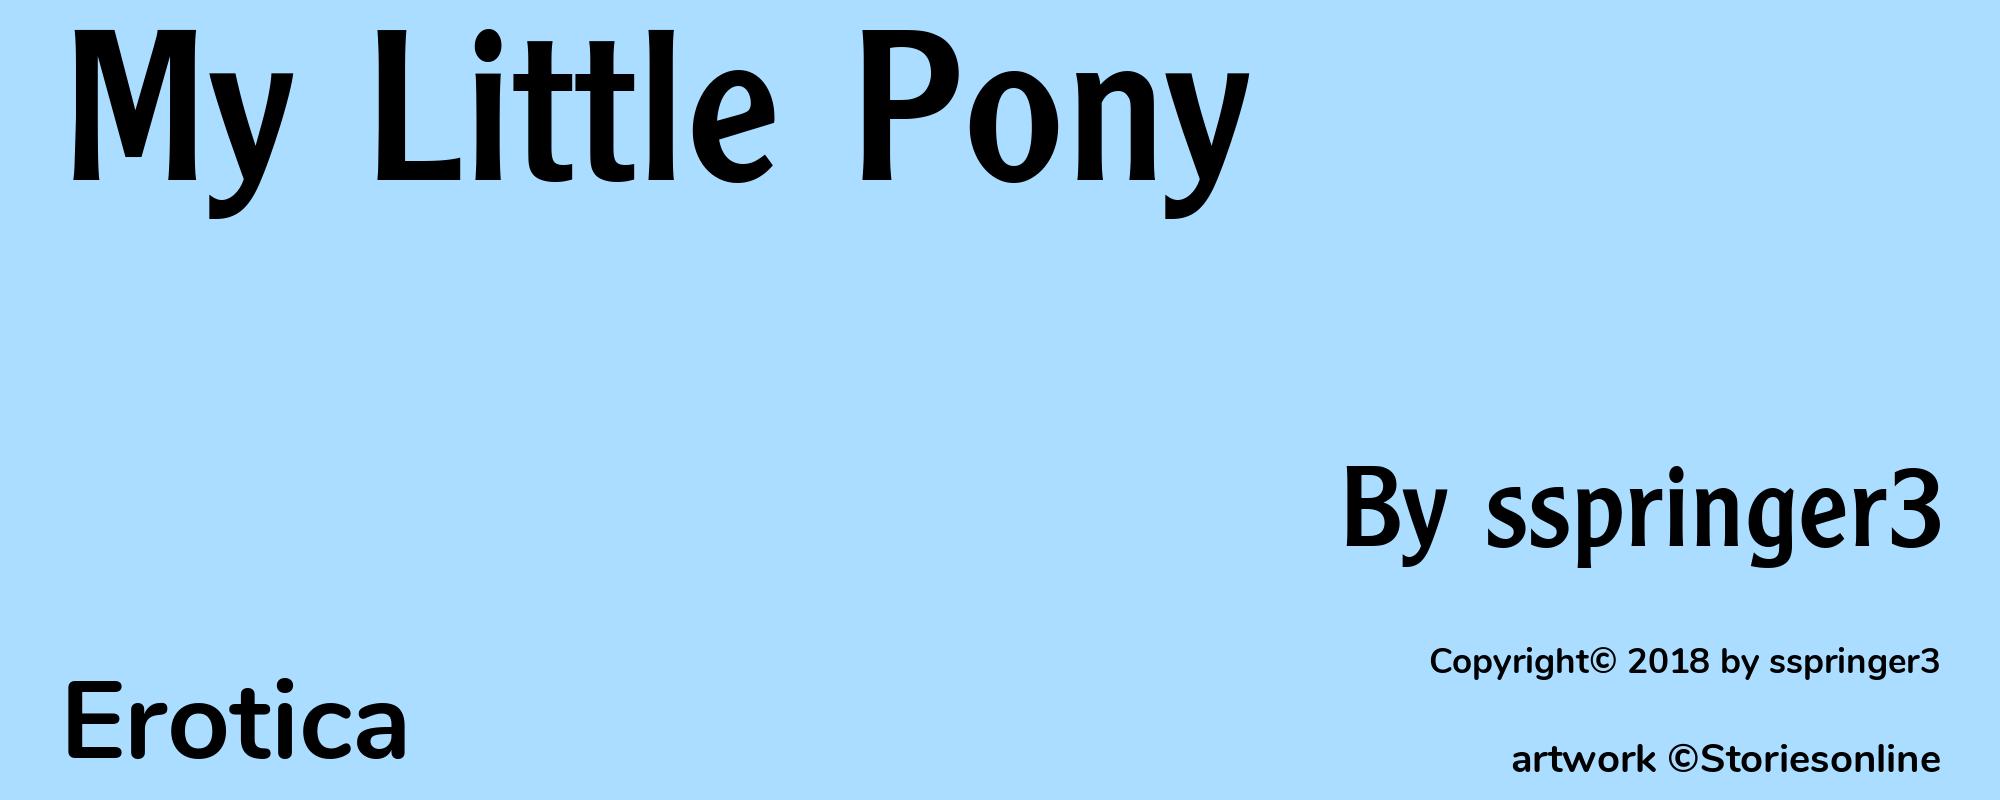 My Little Pony - Cover